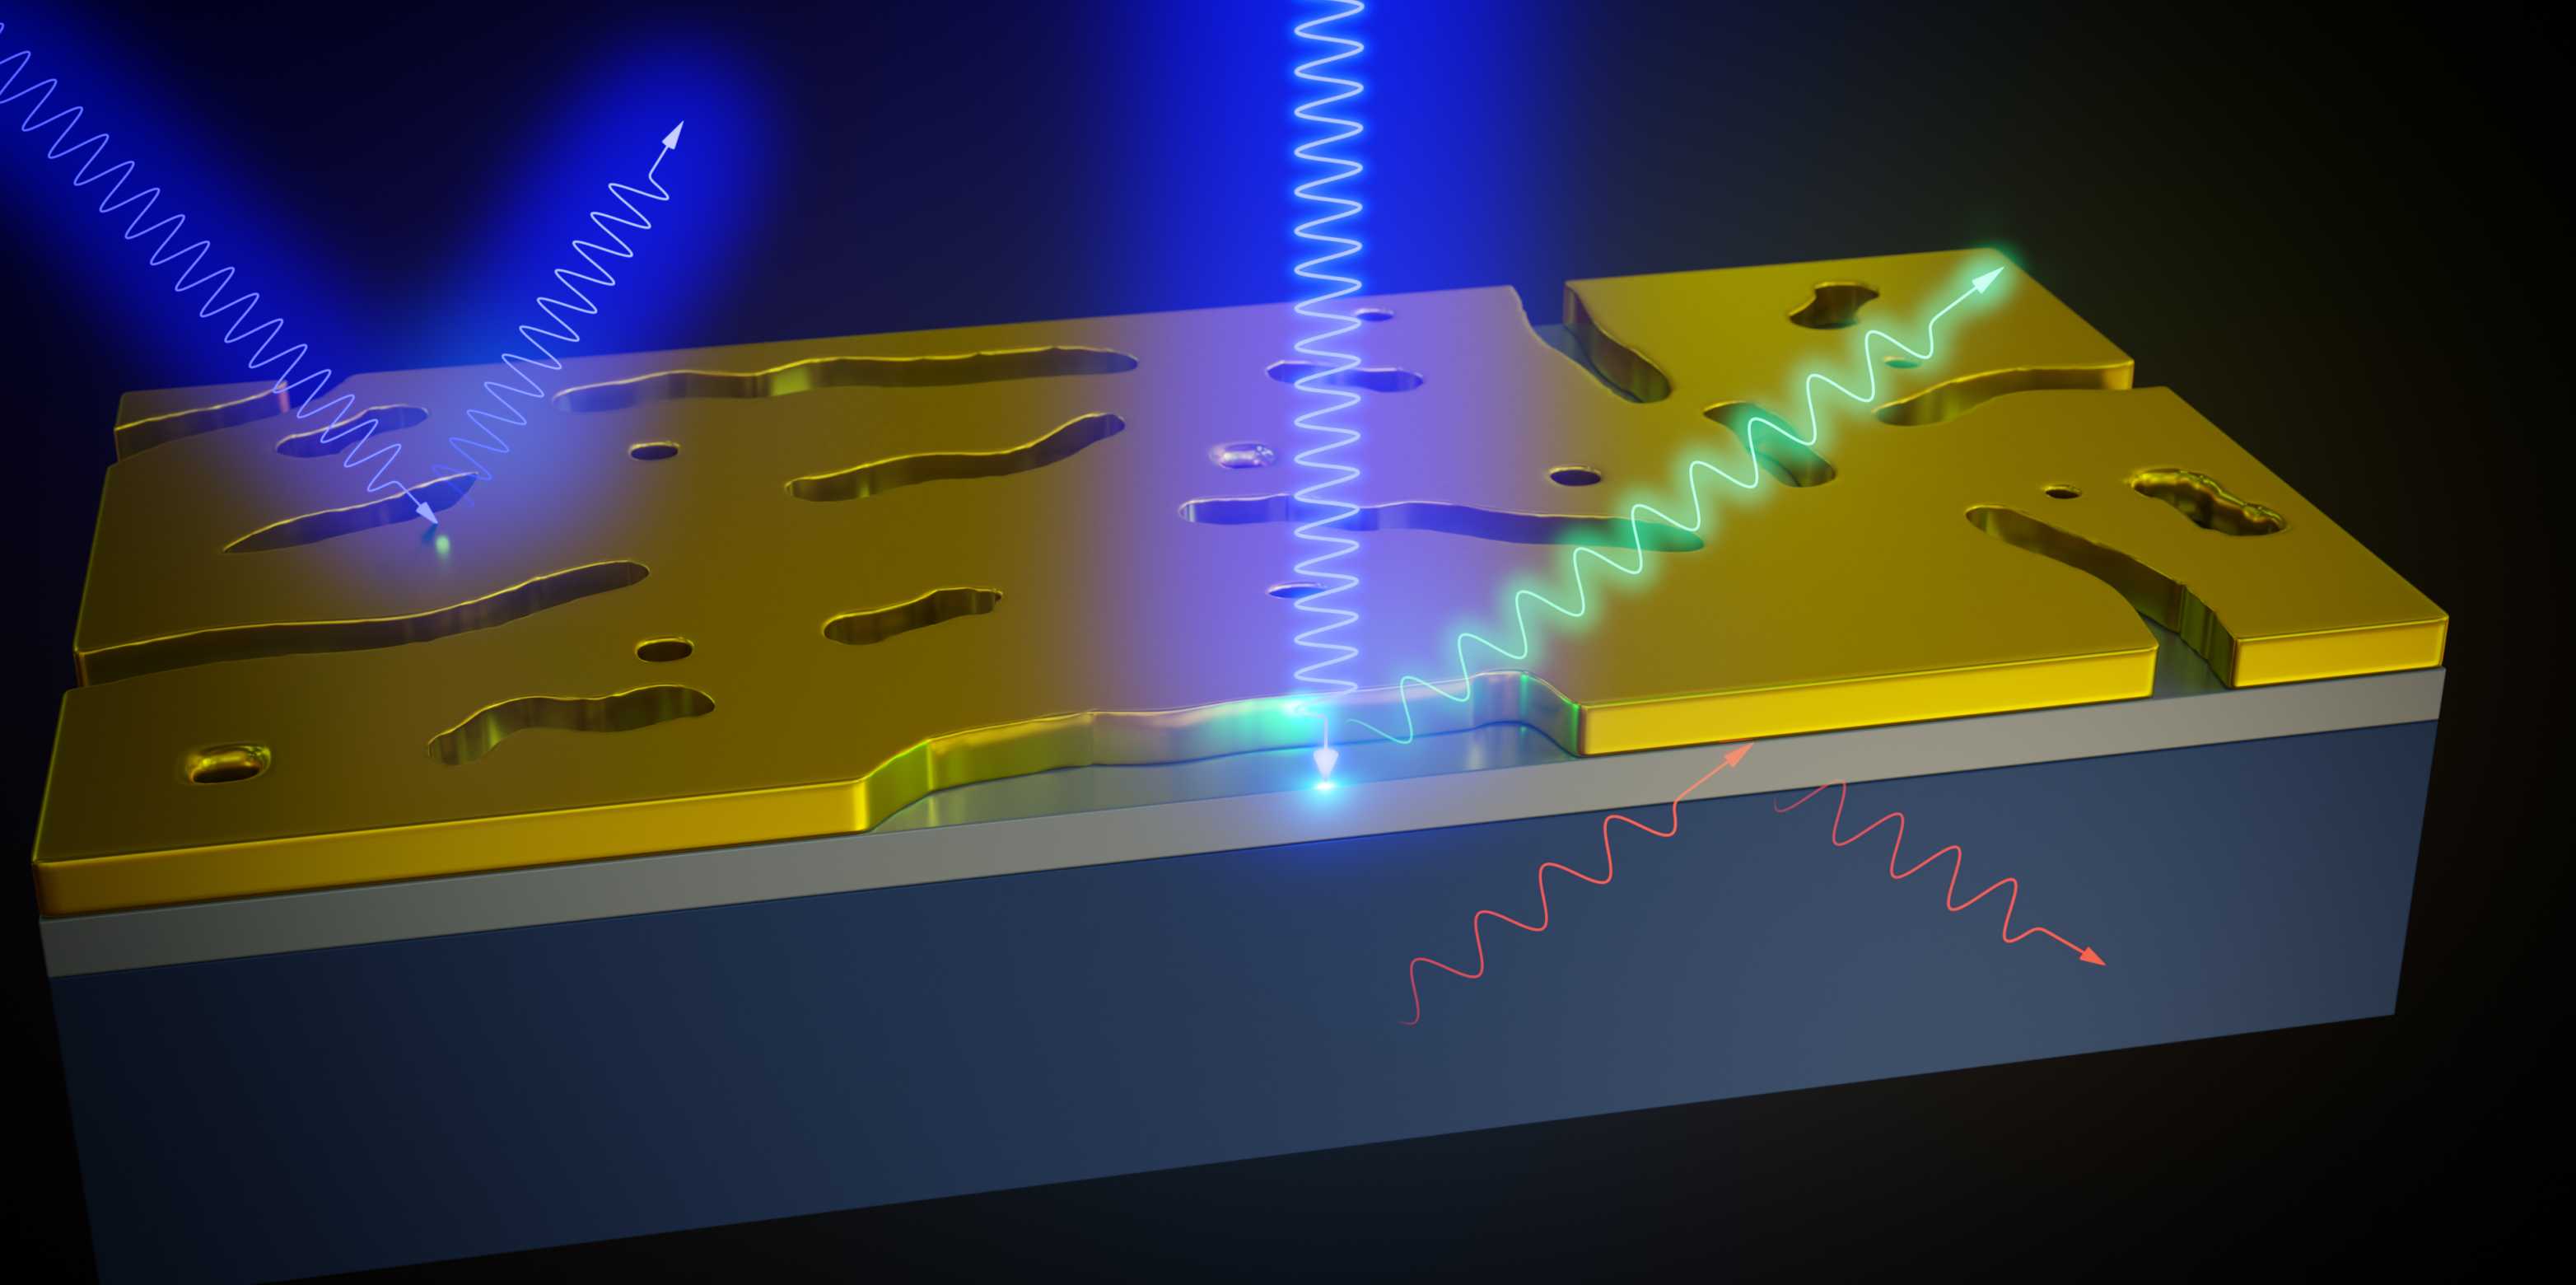 The pores in the gold membrane developed by ETH researchers amplify the laser beam in Raman spectroscopy, allowing it to penetrate only into the surface but not into the bulk of the material